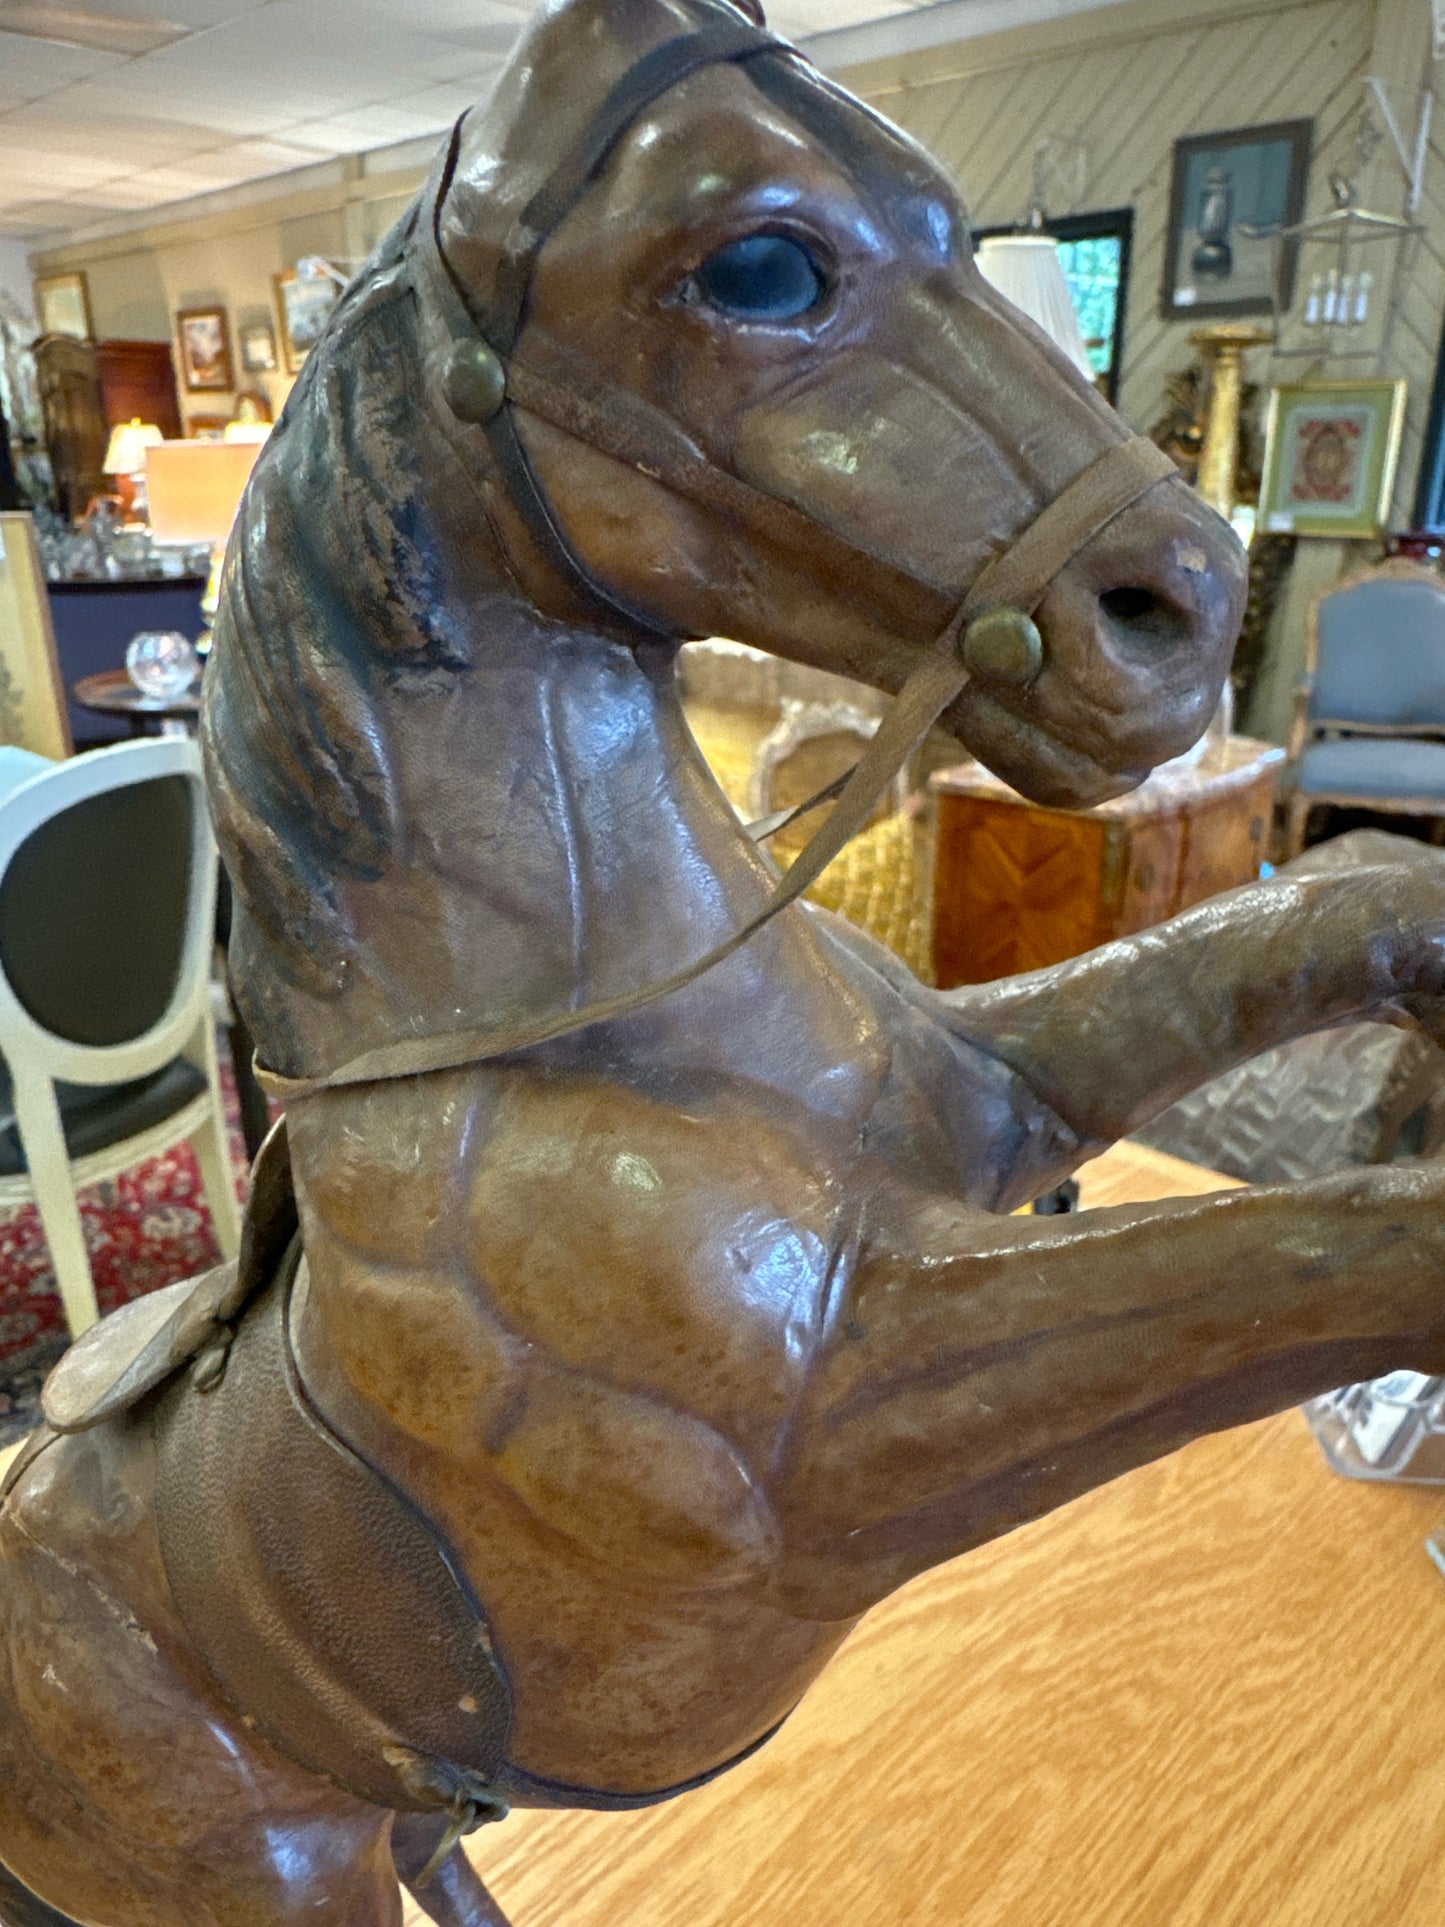 Vintage Leather Wrapped Horse